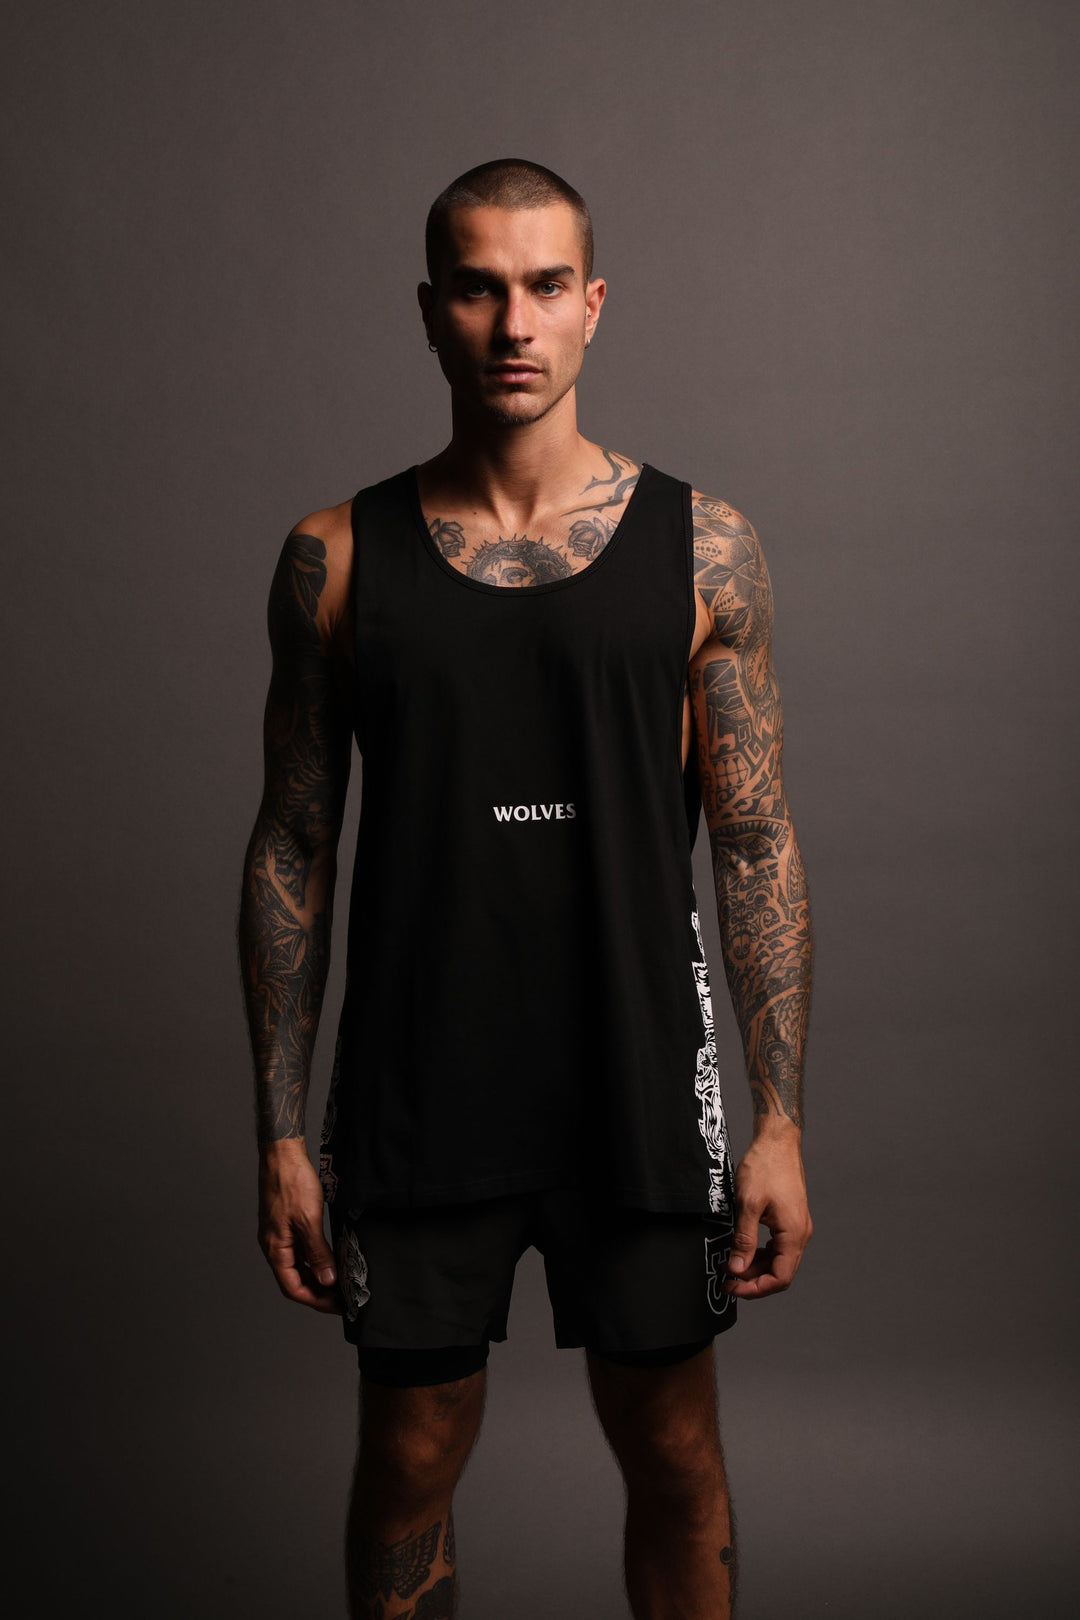 Covered "Panel" Tank in Black